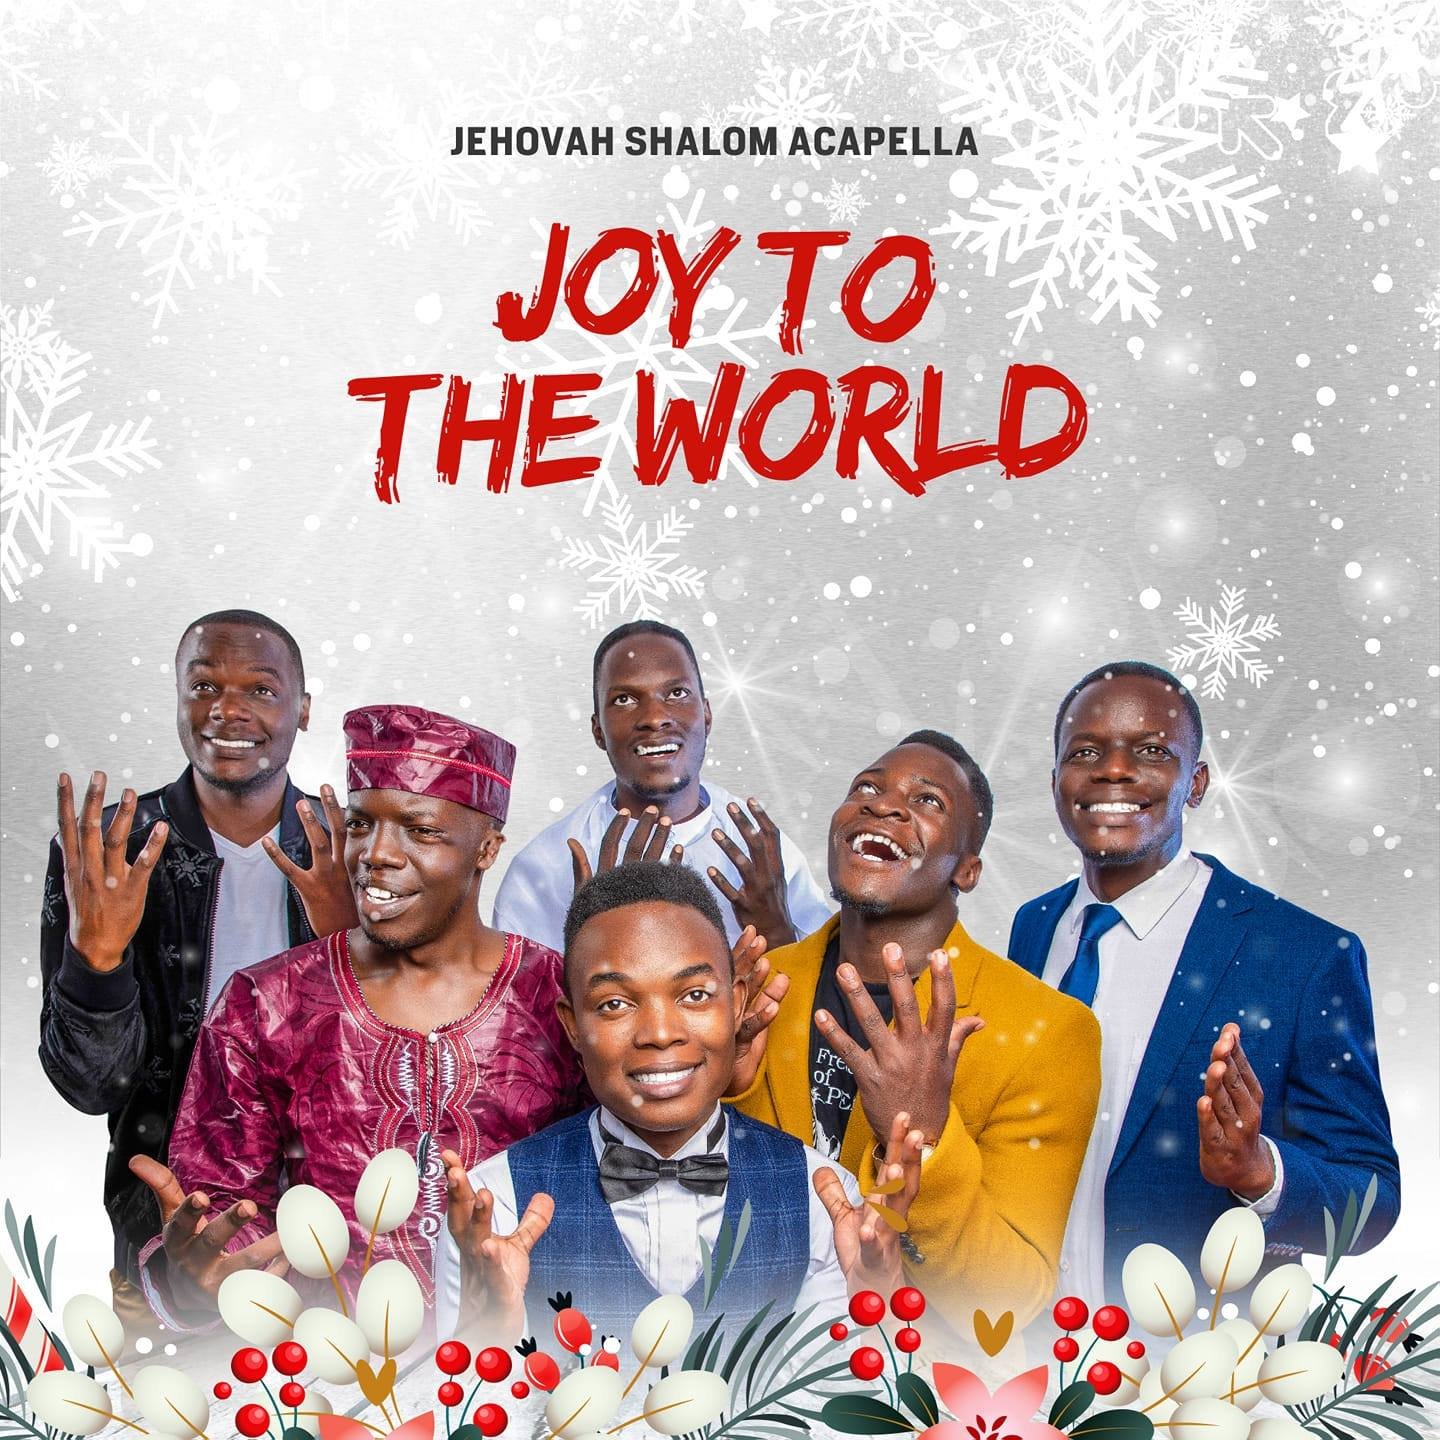 Joy To The World (African Acapella Edition)